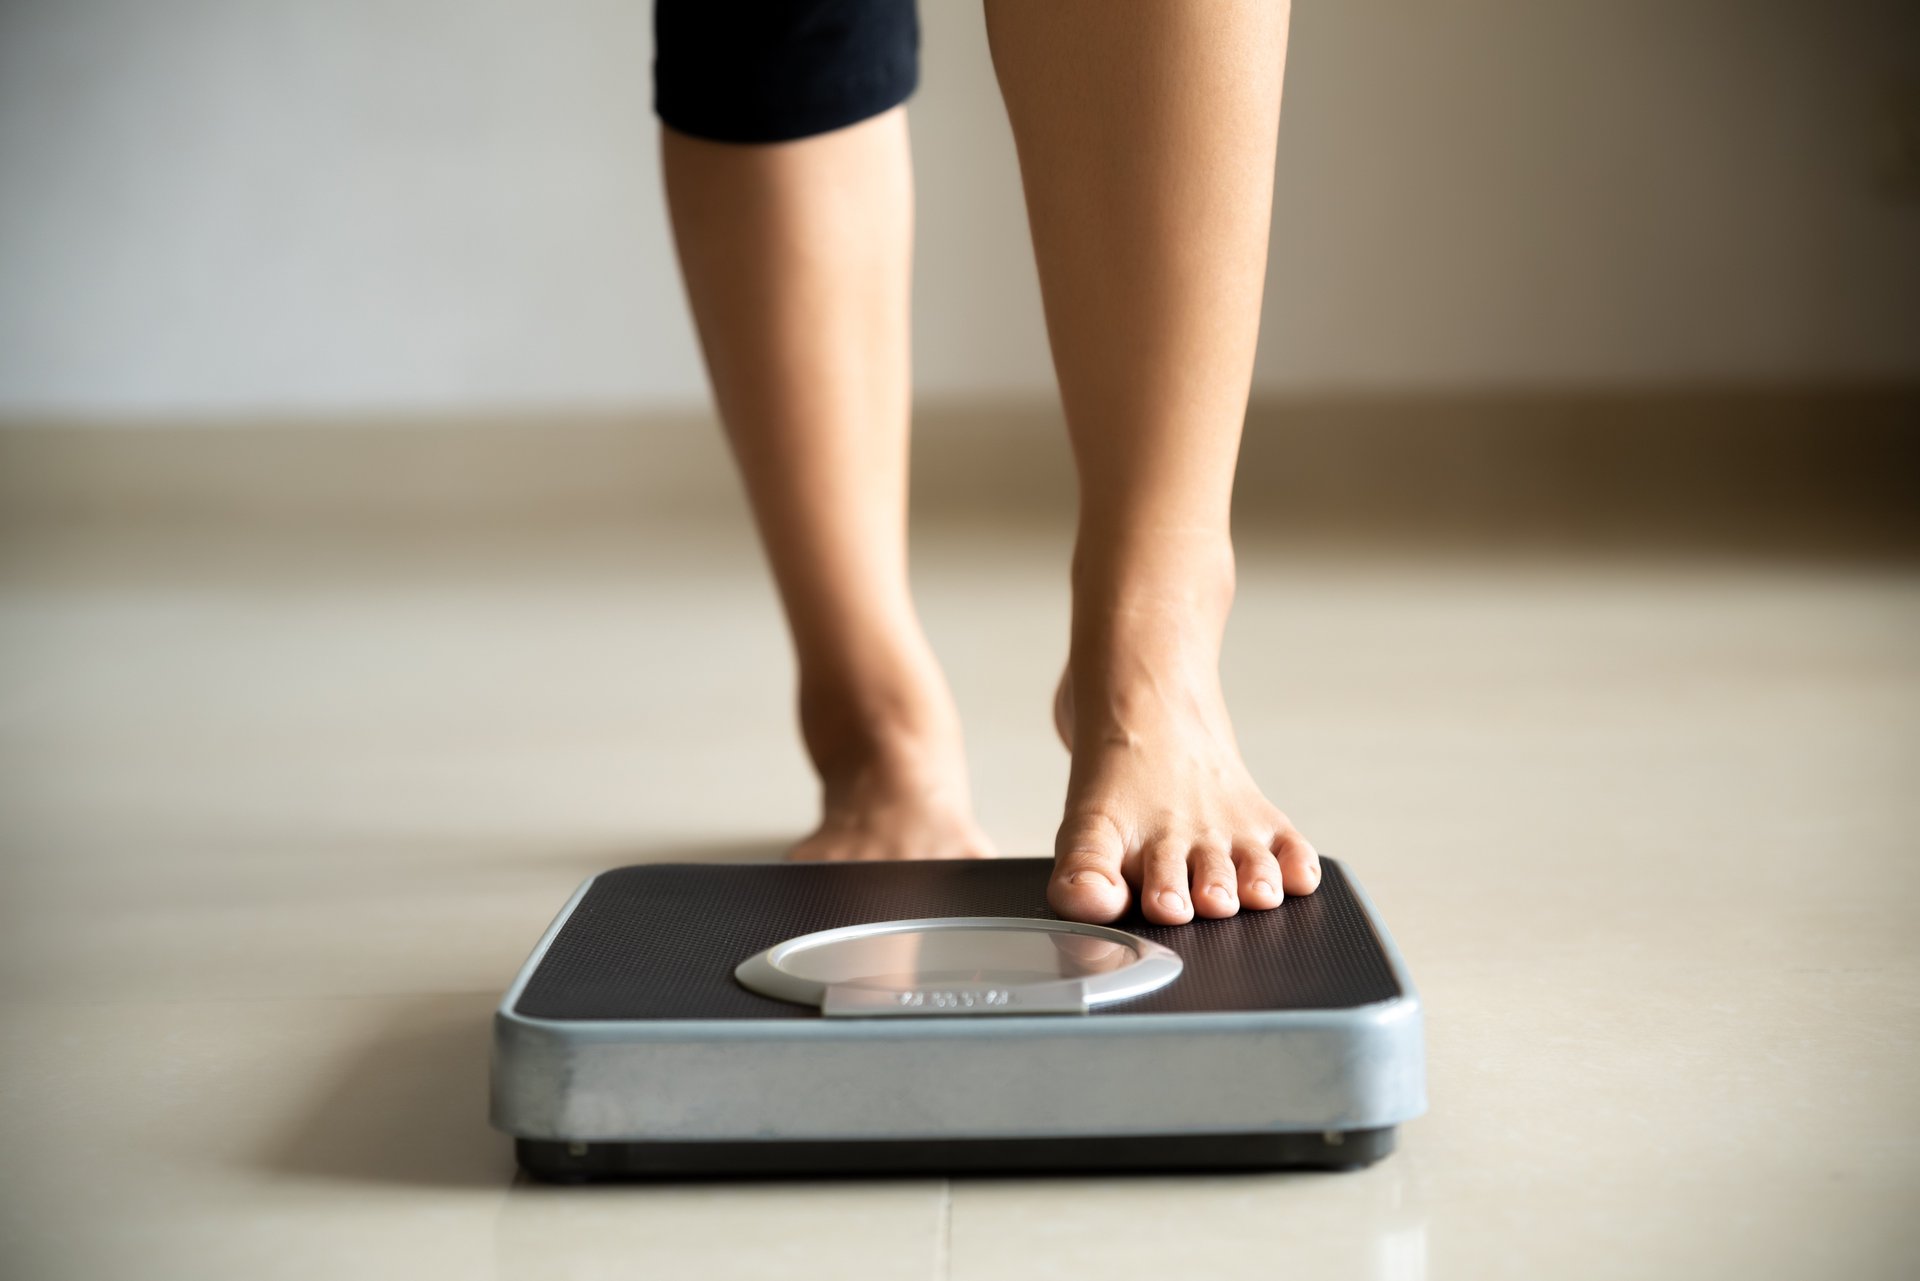 News Picture: When BMI Isn't Used as Measurement, Obesity's Health 'Benefit' Disappears